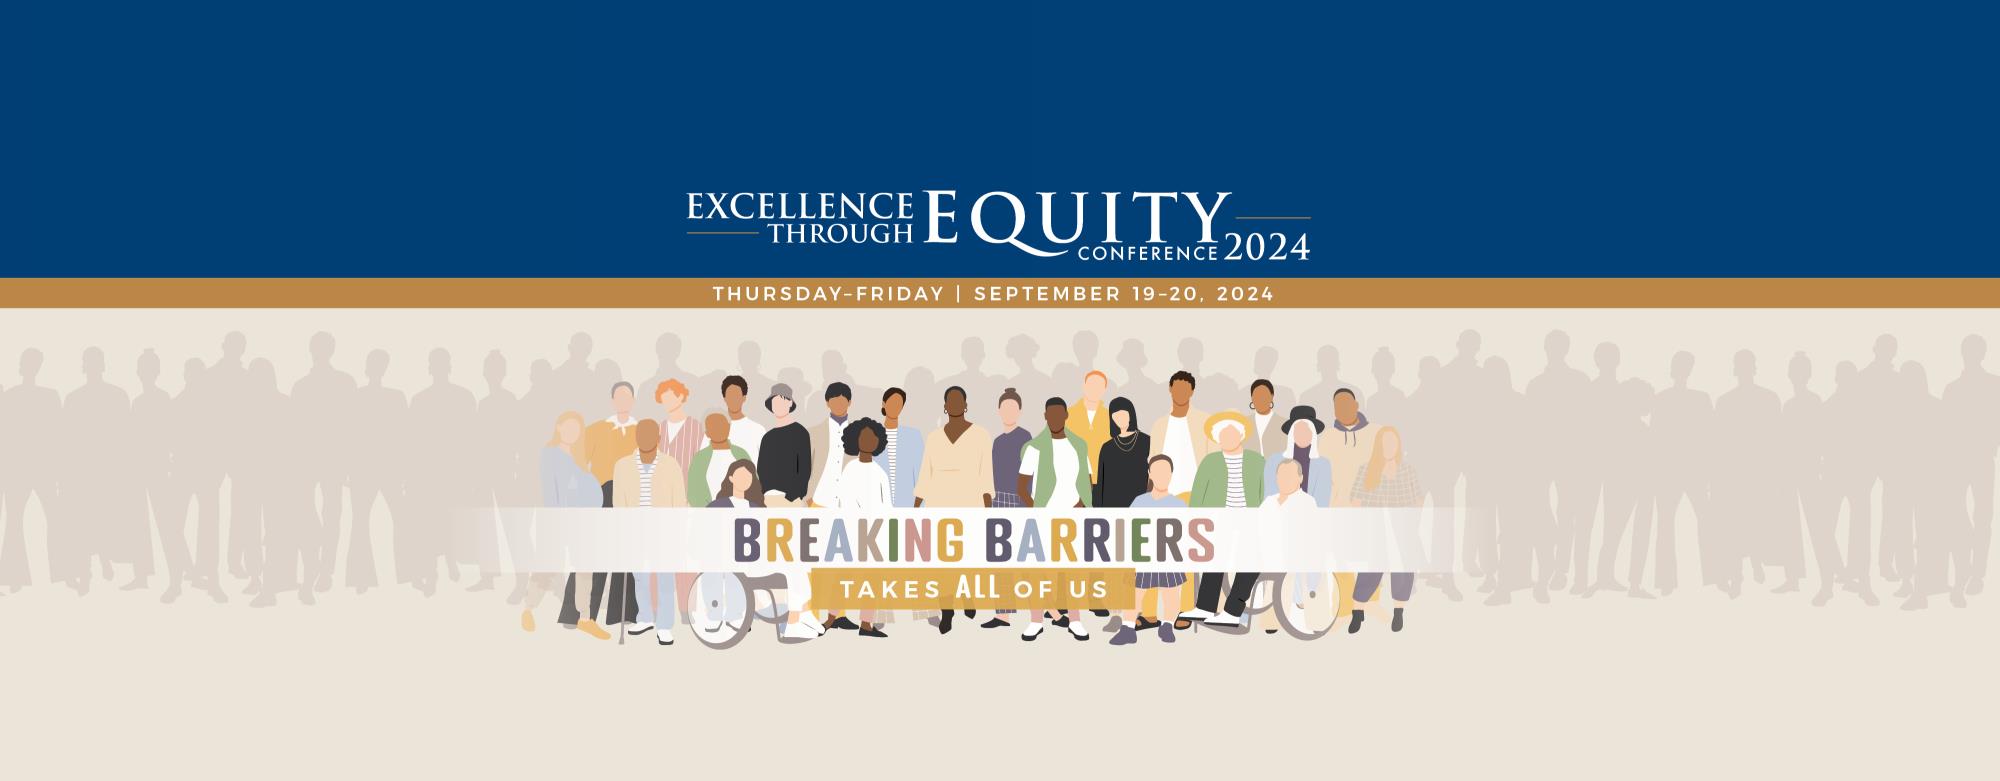 Excellence Through Equity Conference 2024. Thursday-Friday, September 19-20, 2024. Breaking Barriers takes ALL of us.